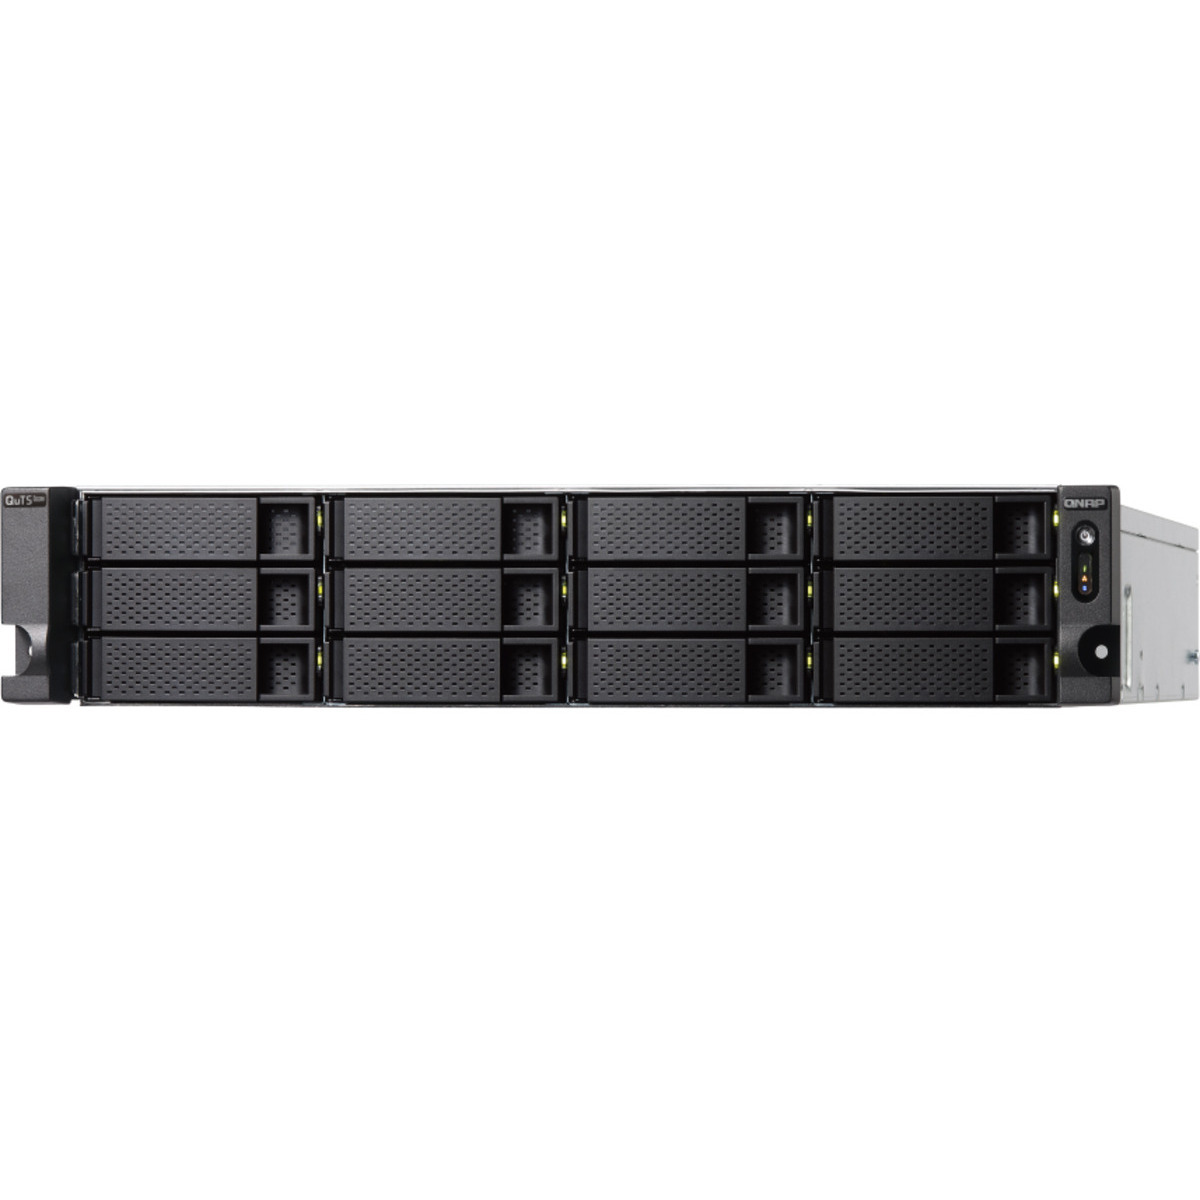 buy QNAP TS-h1886XU-RP R2 QuTS hero Edition 24tb RackMount NAS - Network Attached Storage Device 12x2000gb Seagate IronWolf Pro ST2000NT001 3.5 7200rpm SATA 6Gb/s HDD NAS Class Drives Installed - Burn-In Tested - nas headquarters buy network attached storage server device das new raid-5 free shipping usa spring sale TS-h1886XU-RP R2 QuTS hero Edition